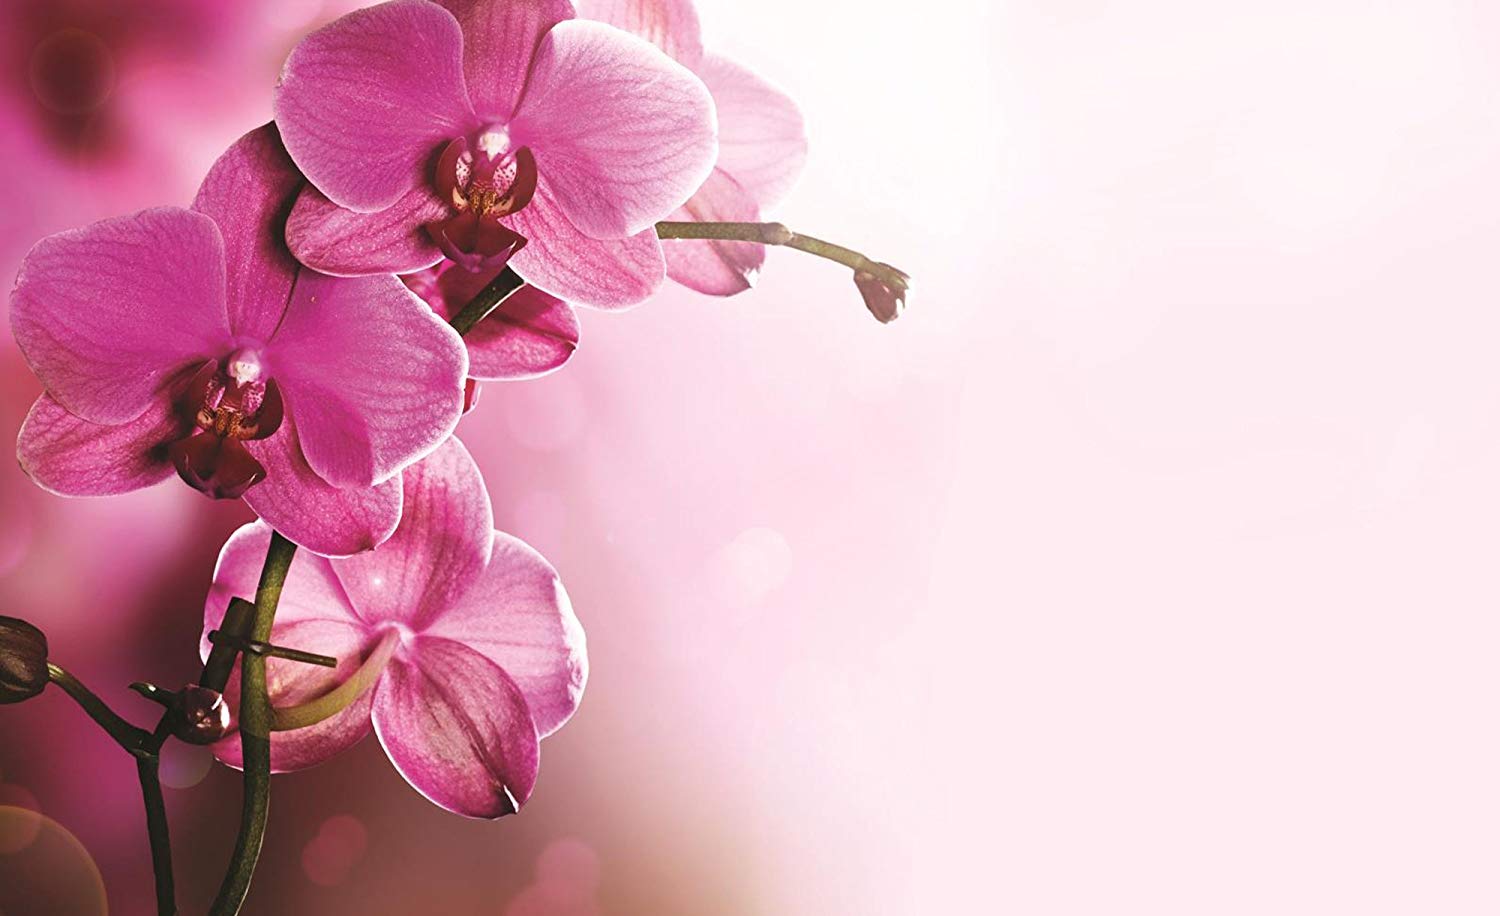 Soft Pink Orchid Flowers Wallpaper Mural